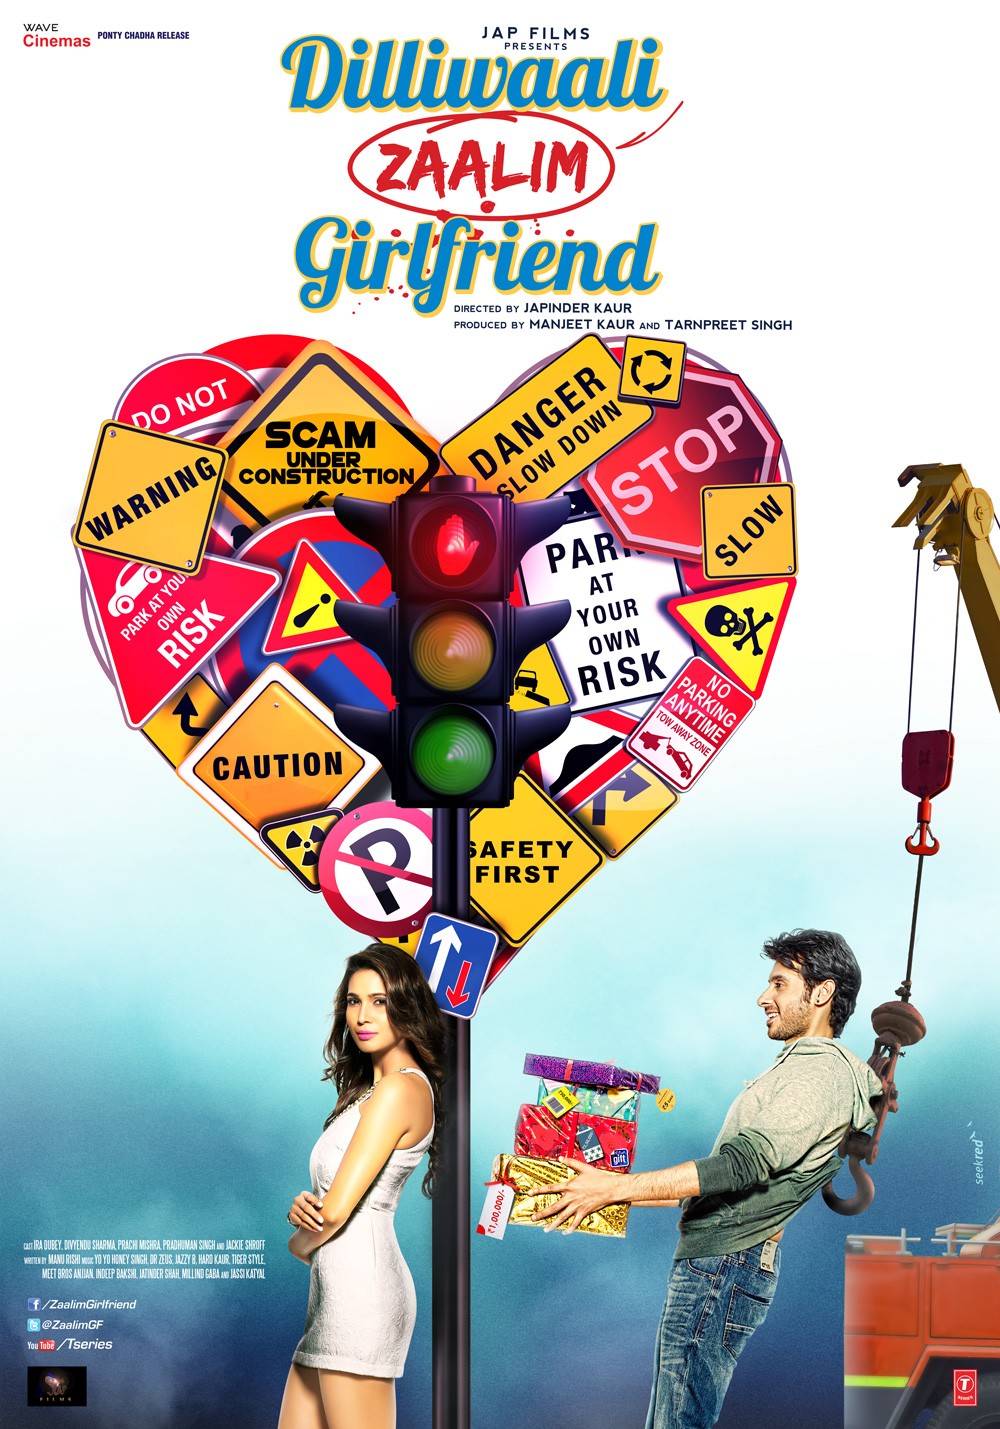 Extra Large Movie Poster Image for Dilliwaali Zaalim Girlfriend (#4 of 7)